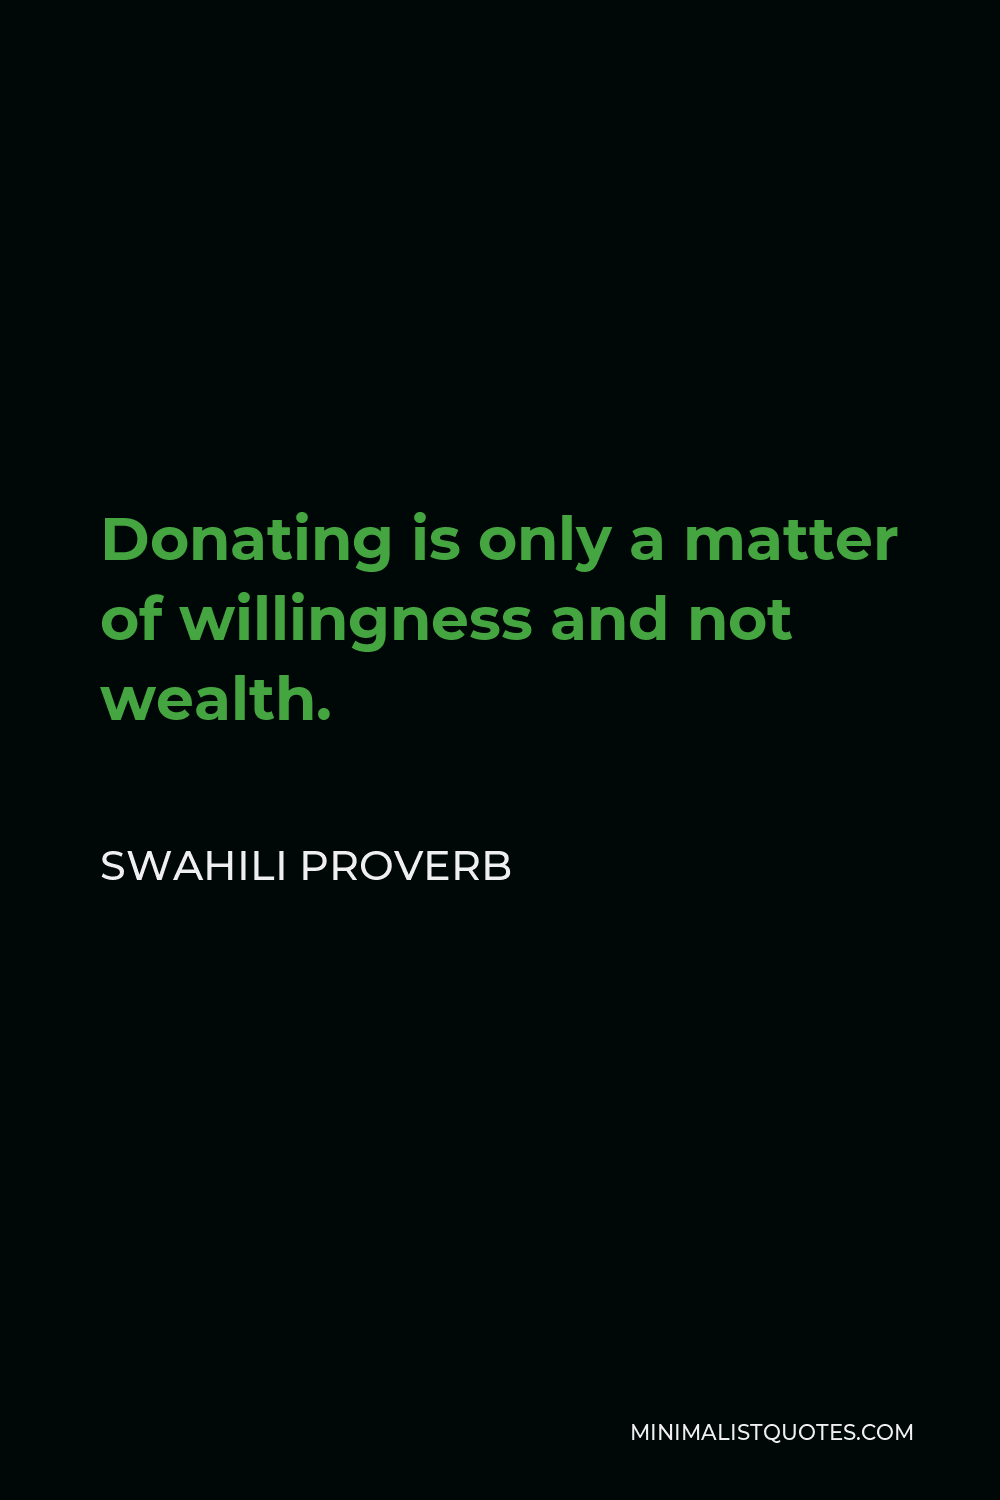 Swahili Proverb Quote - Donating is only a matter of willingness and not wealth.